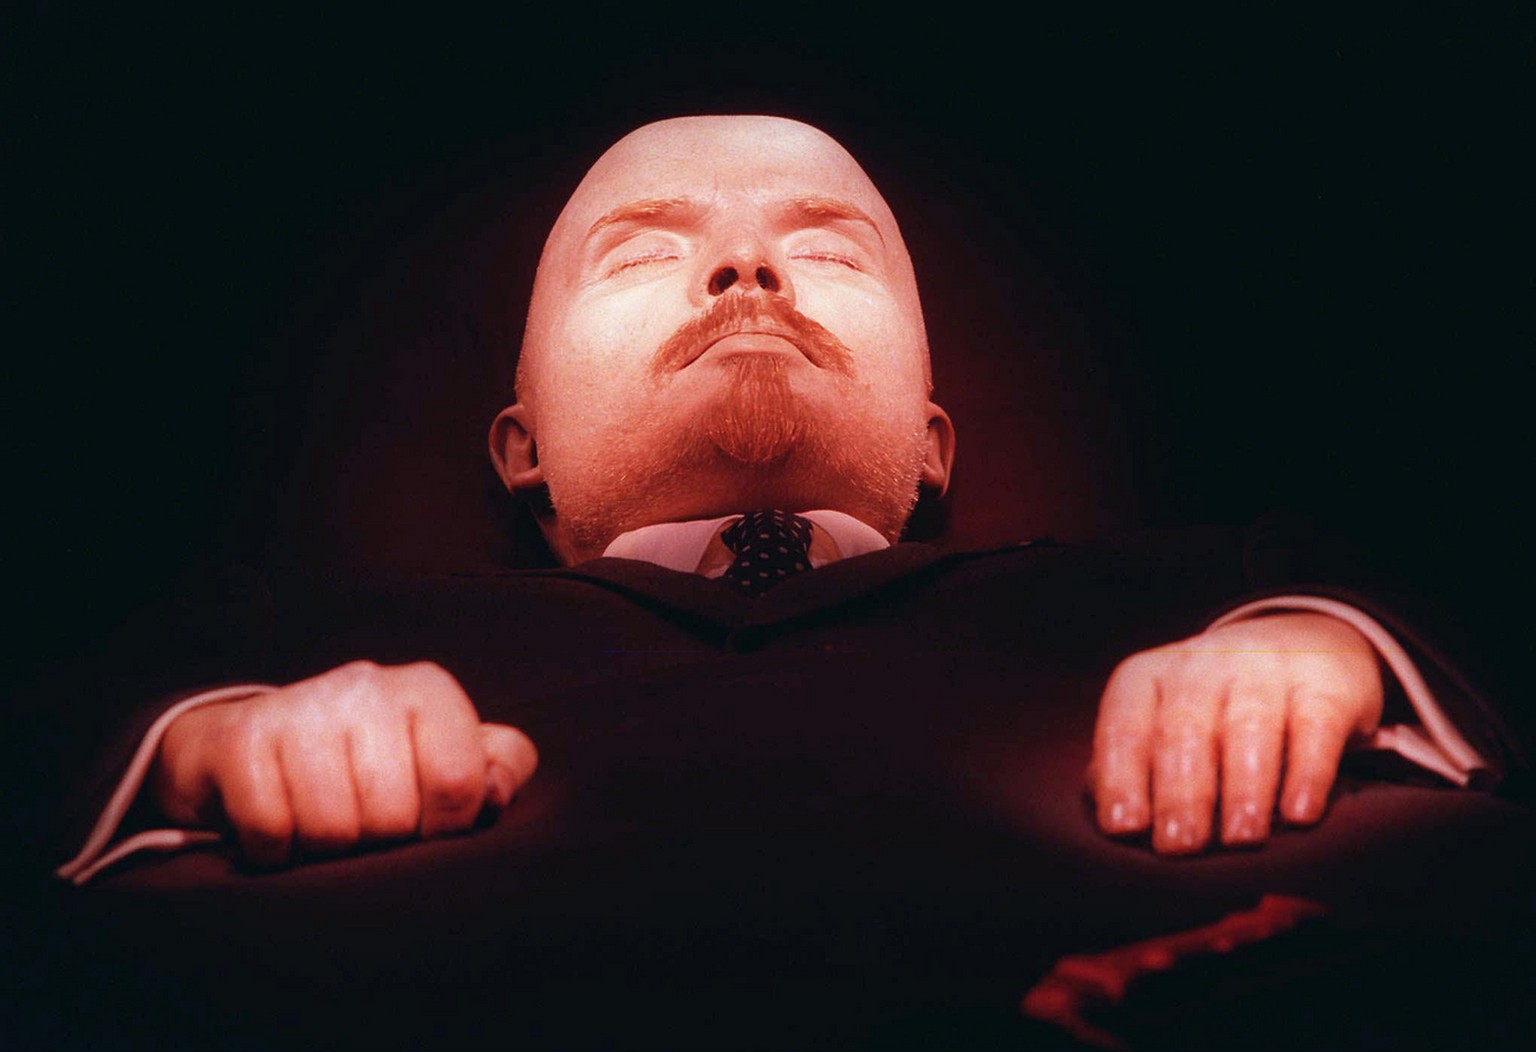 Vladimir Lenin, founder of the Soviet Union, lays embalmed in his tomb in Moscow&#039;s Red Square, Wednesday, April 16, 1997, six days before his 127th April 22 birthday. An influential Russian gover ...